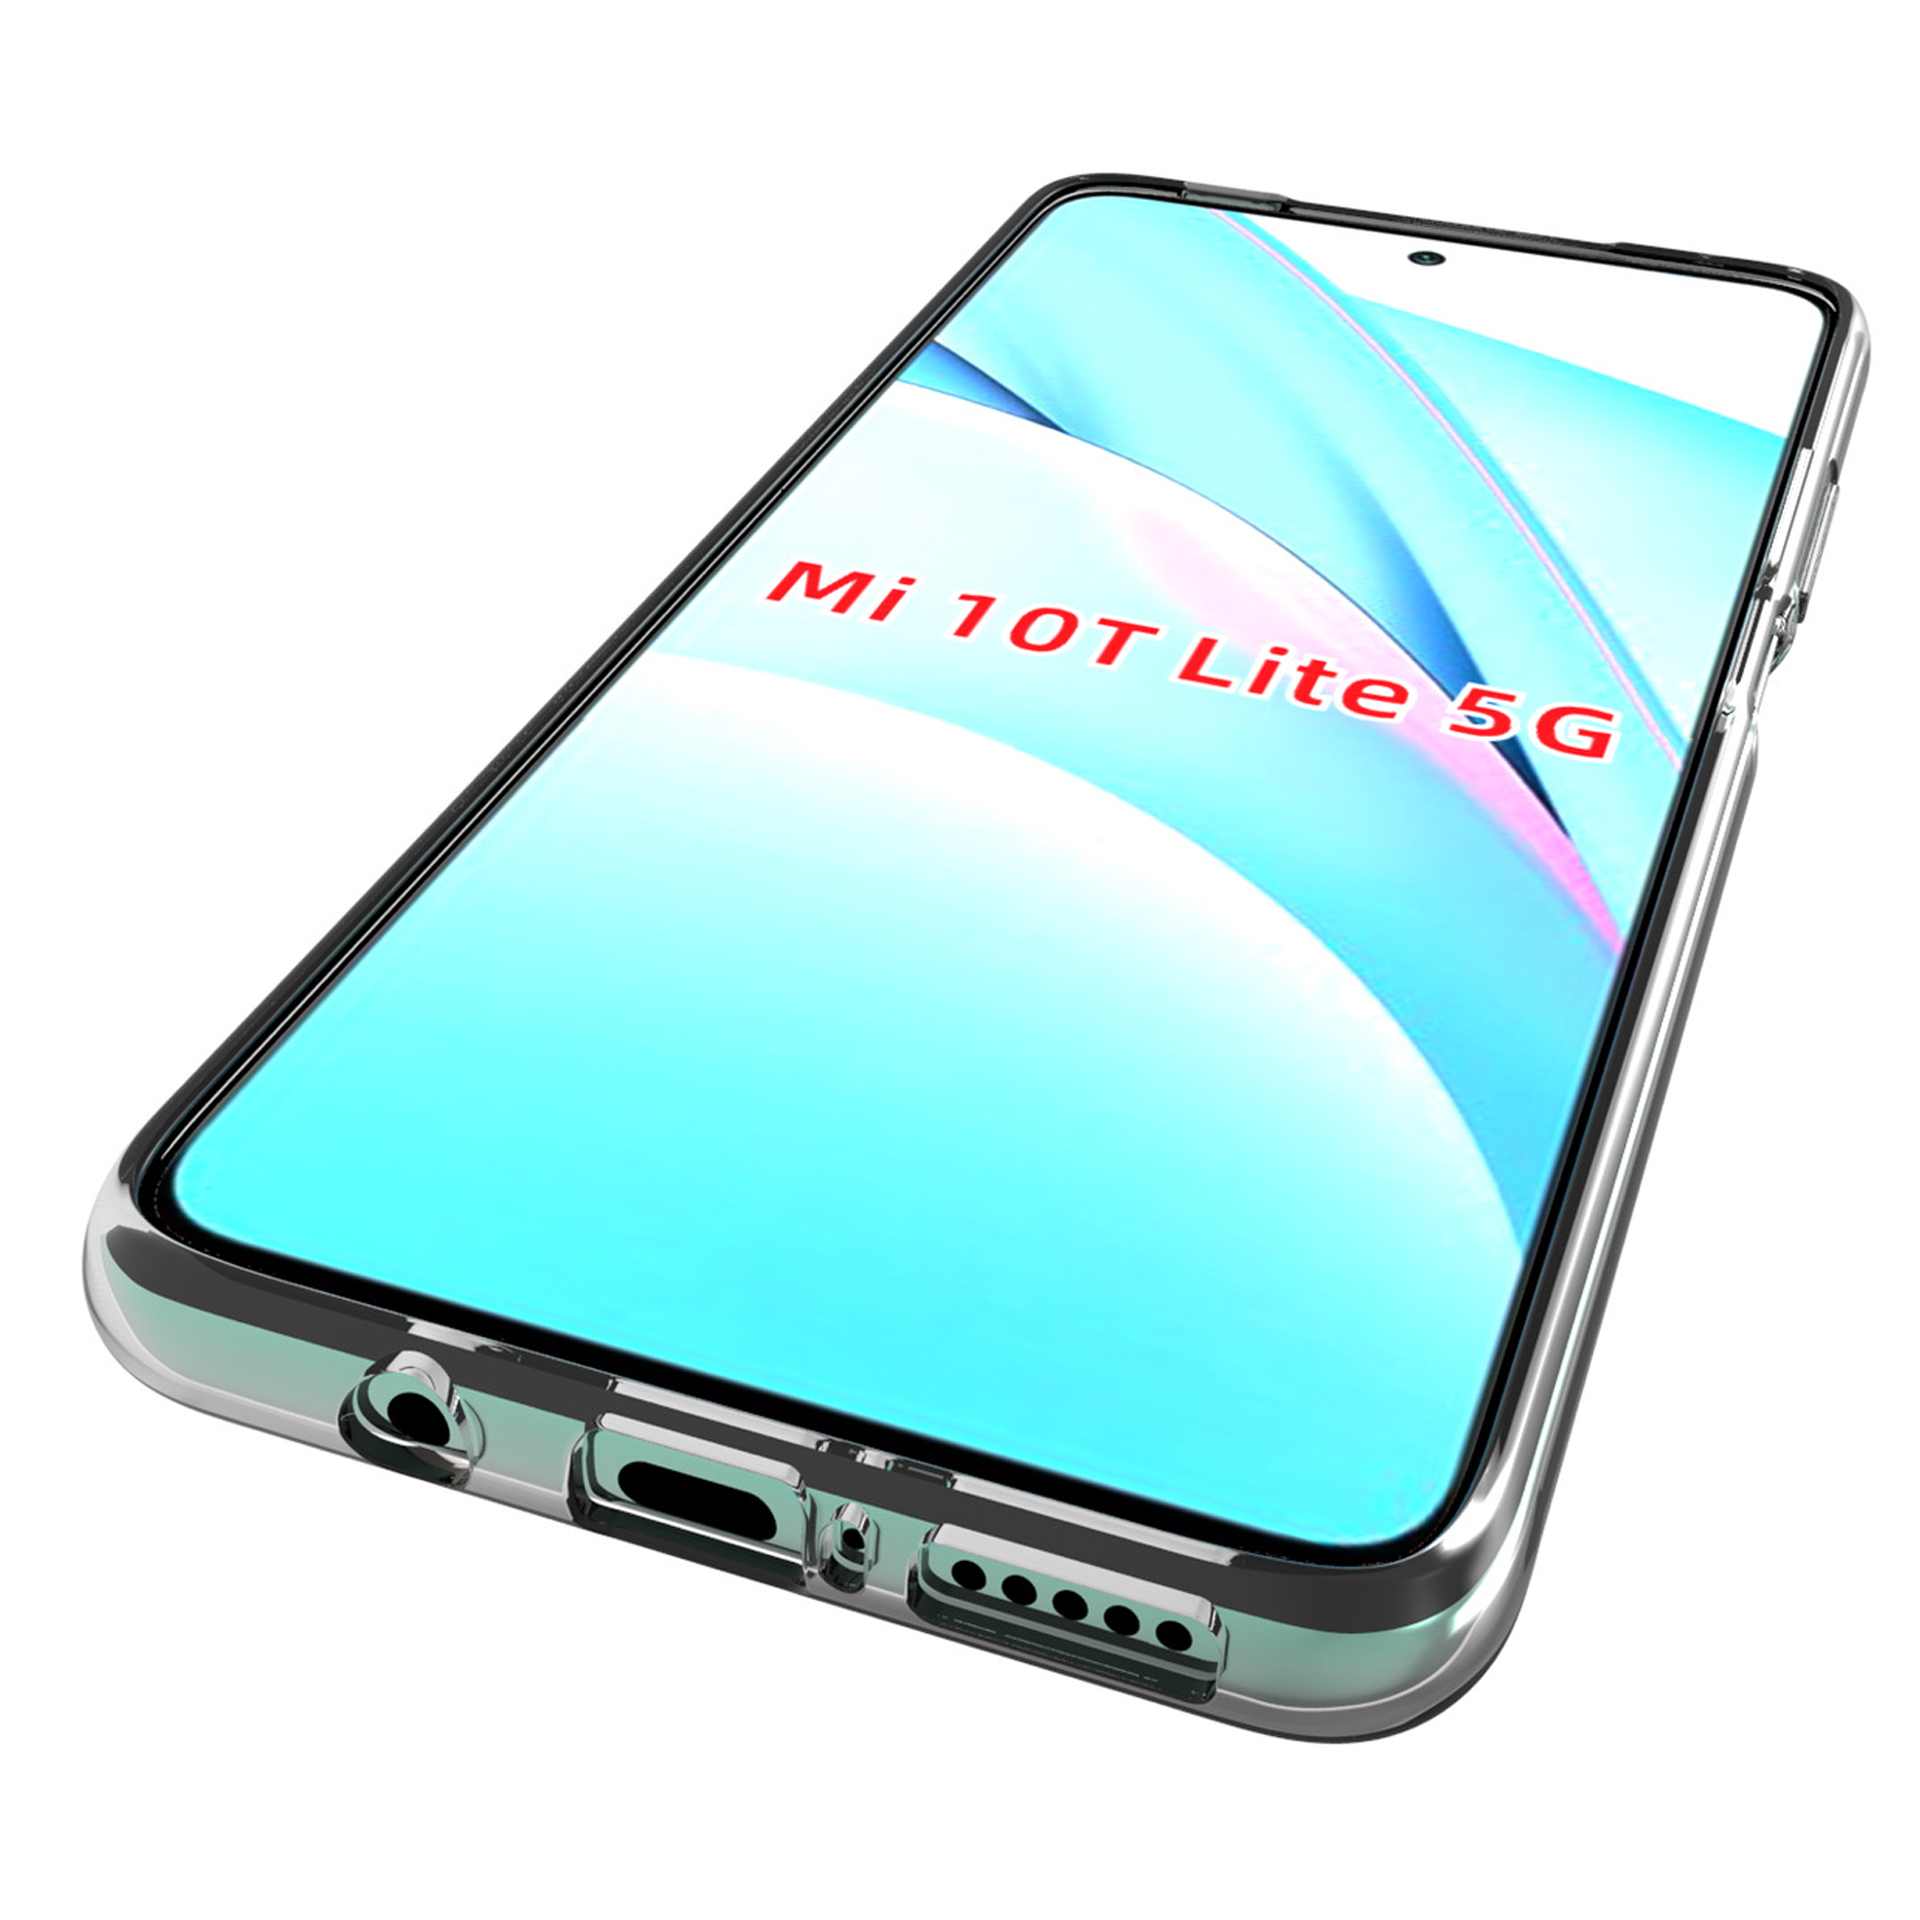 Bakeey-for-Xiaomi-Mi-10T-Lite-5G--Redmi-Note-9-Pro-5G-Case-Crystal-Clear-Transparent-Ultra-Thin-Non--1790619-7